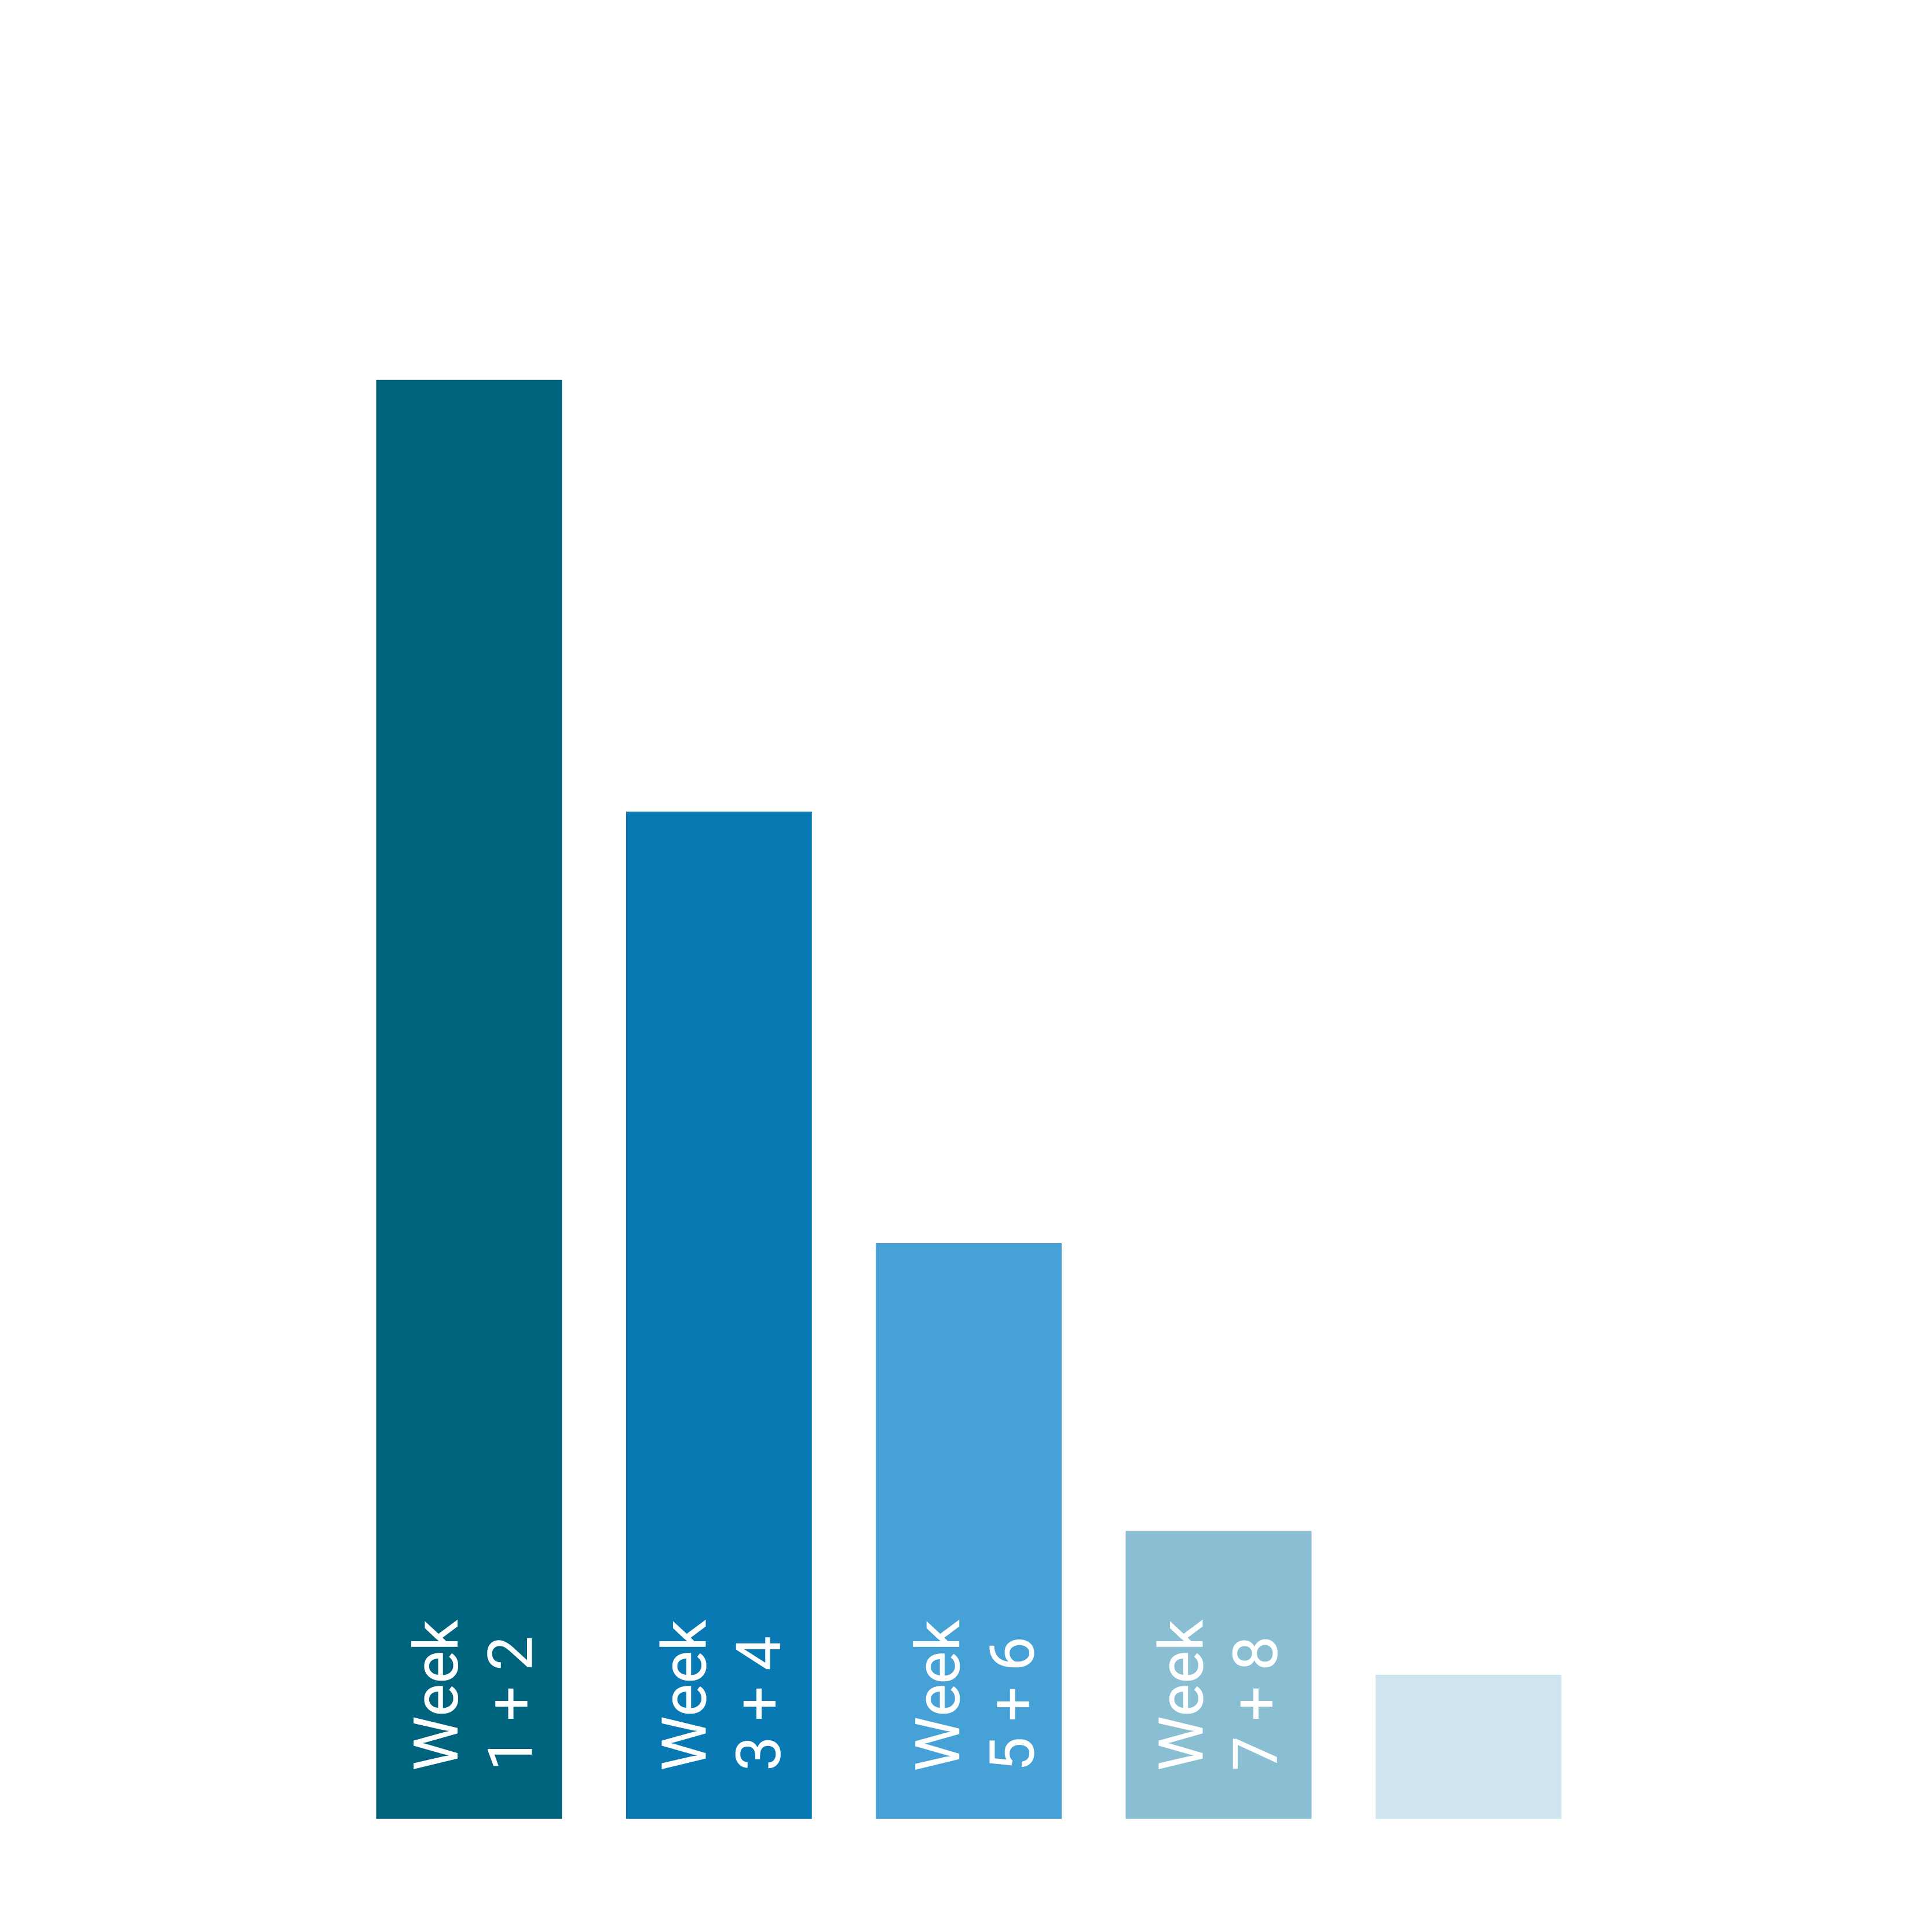 PrivateNess Network NCH buyback plan